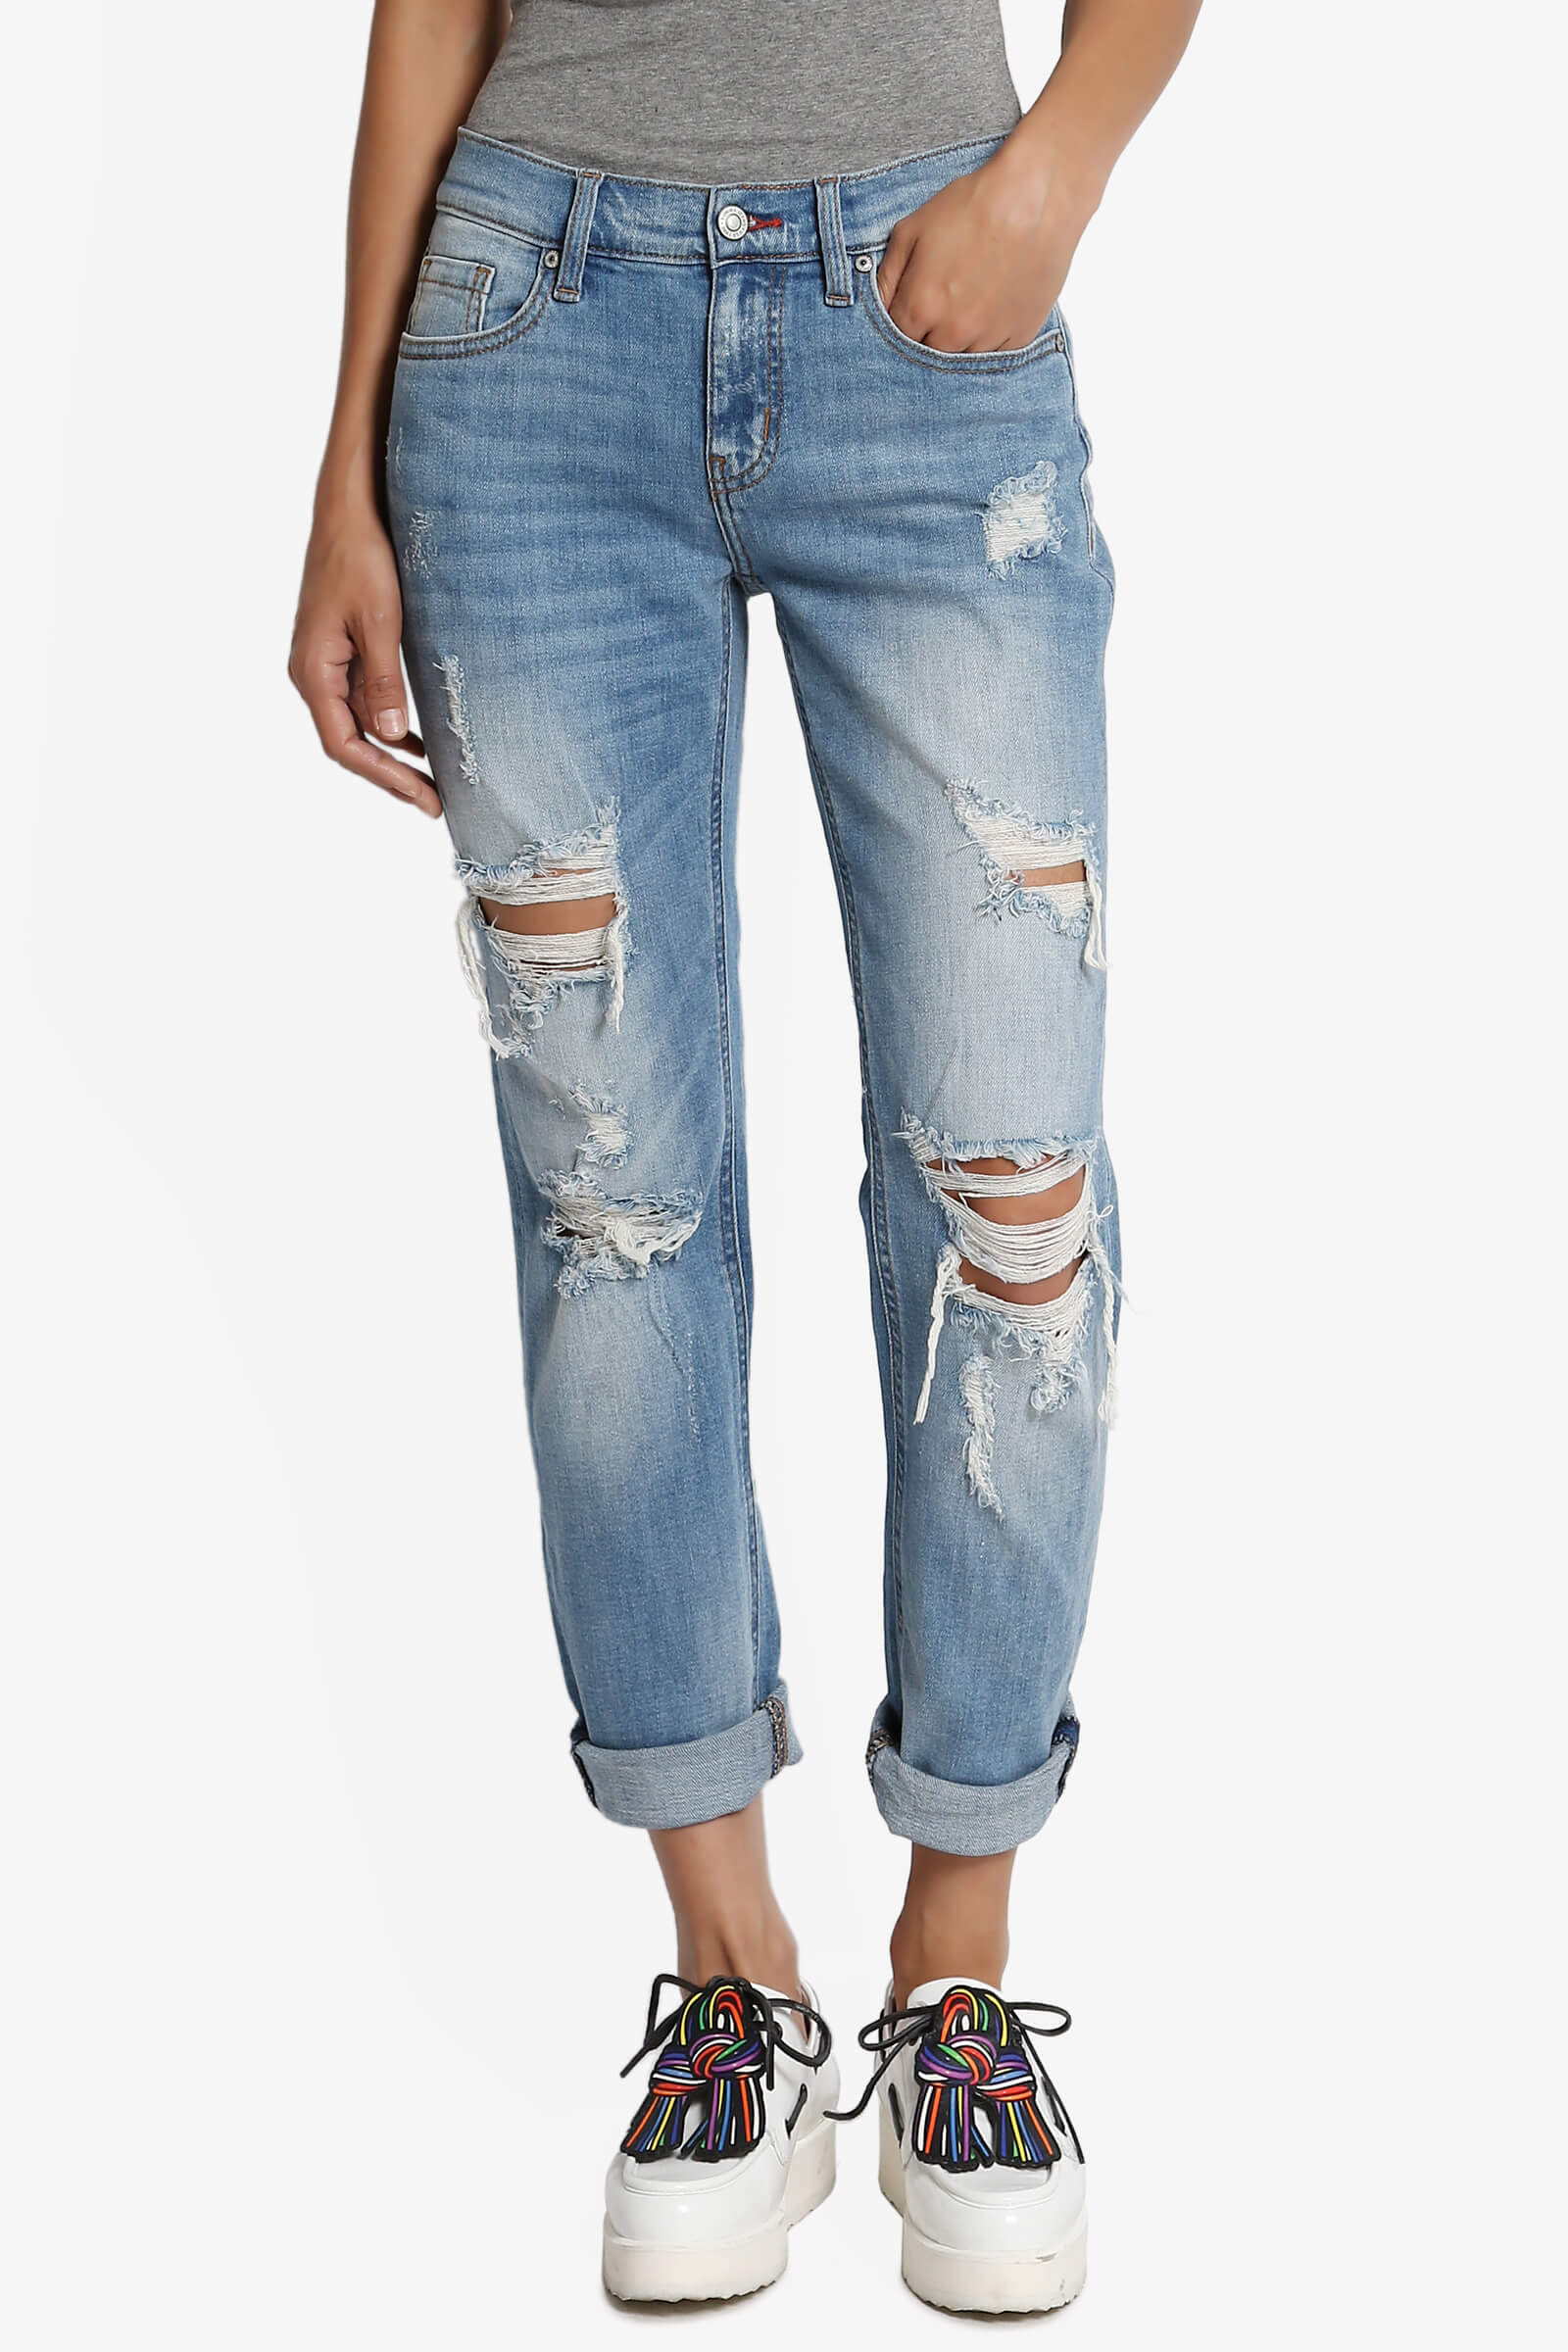 TheMogan Distressed Destructed Washed Denim Mid Rise Relaxed Boyfriend ...